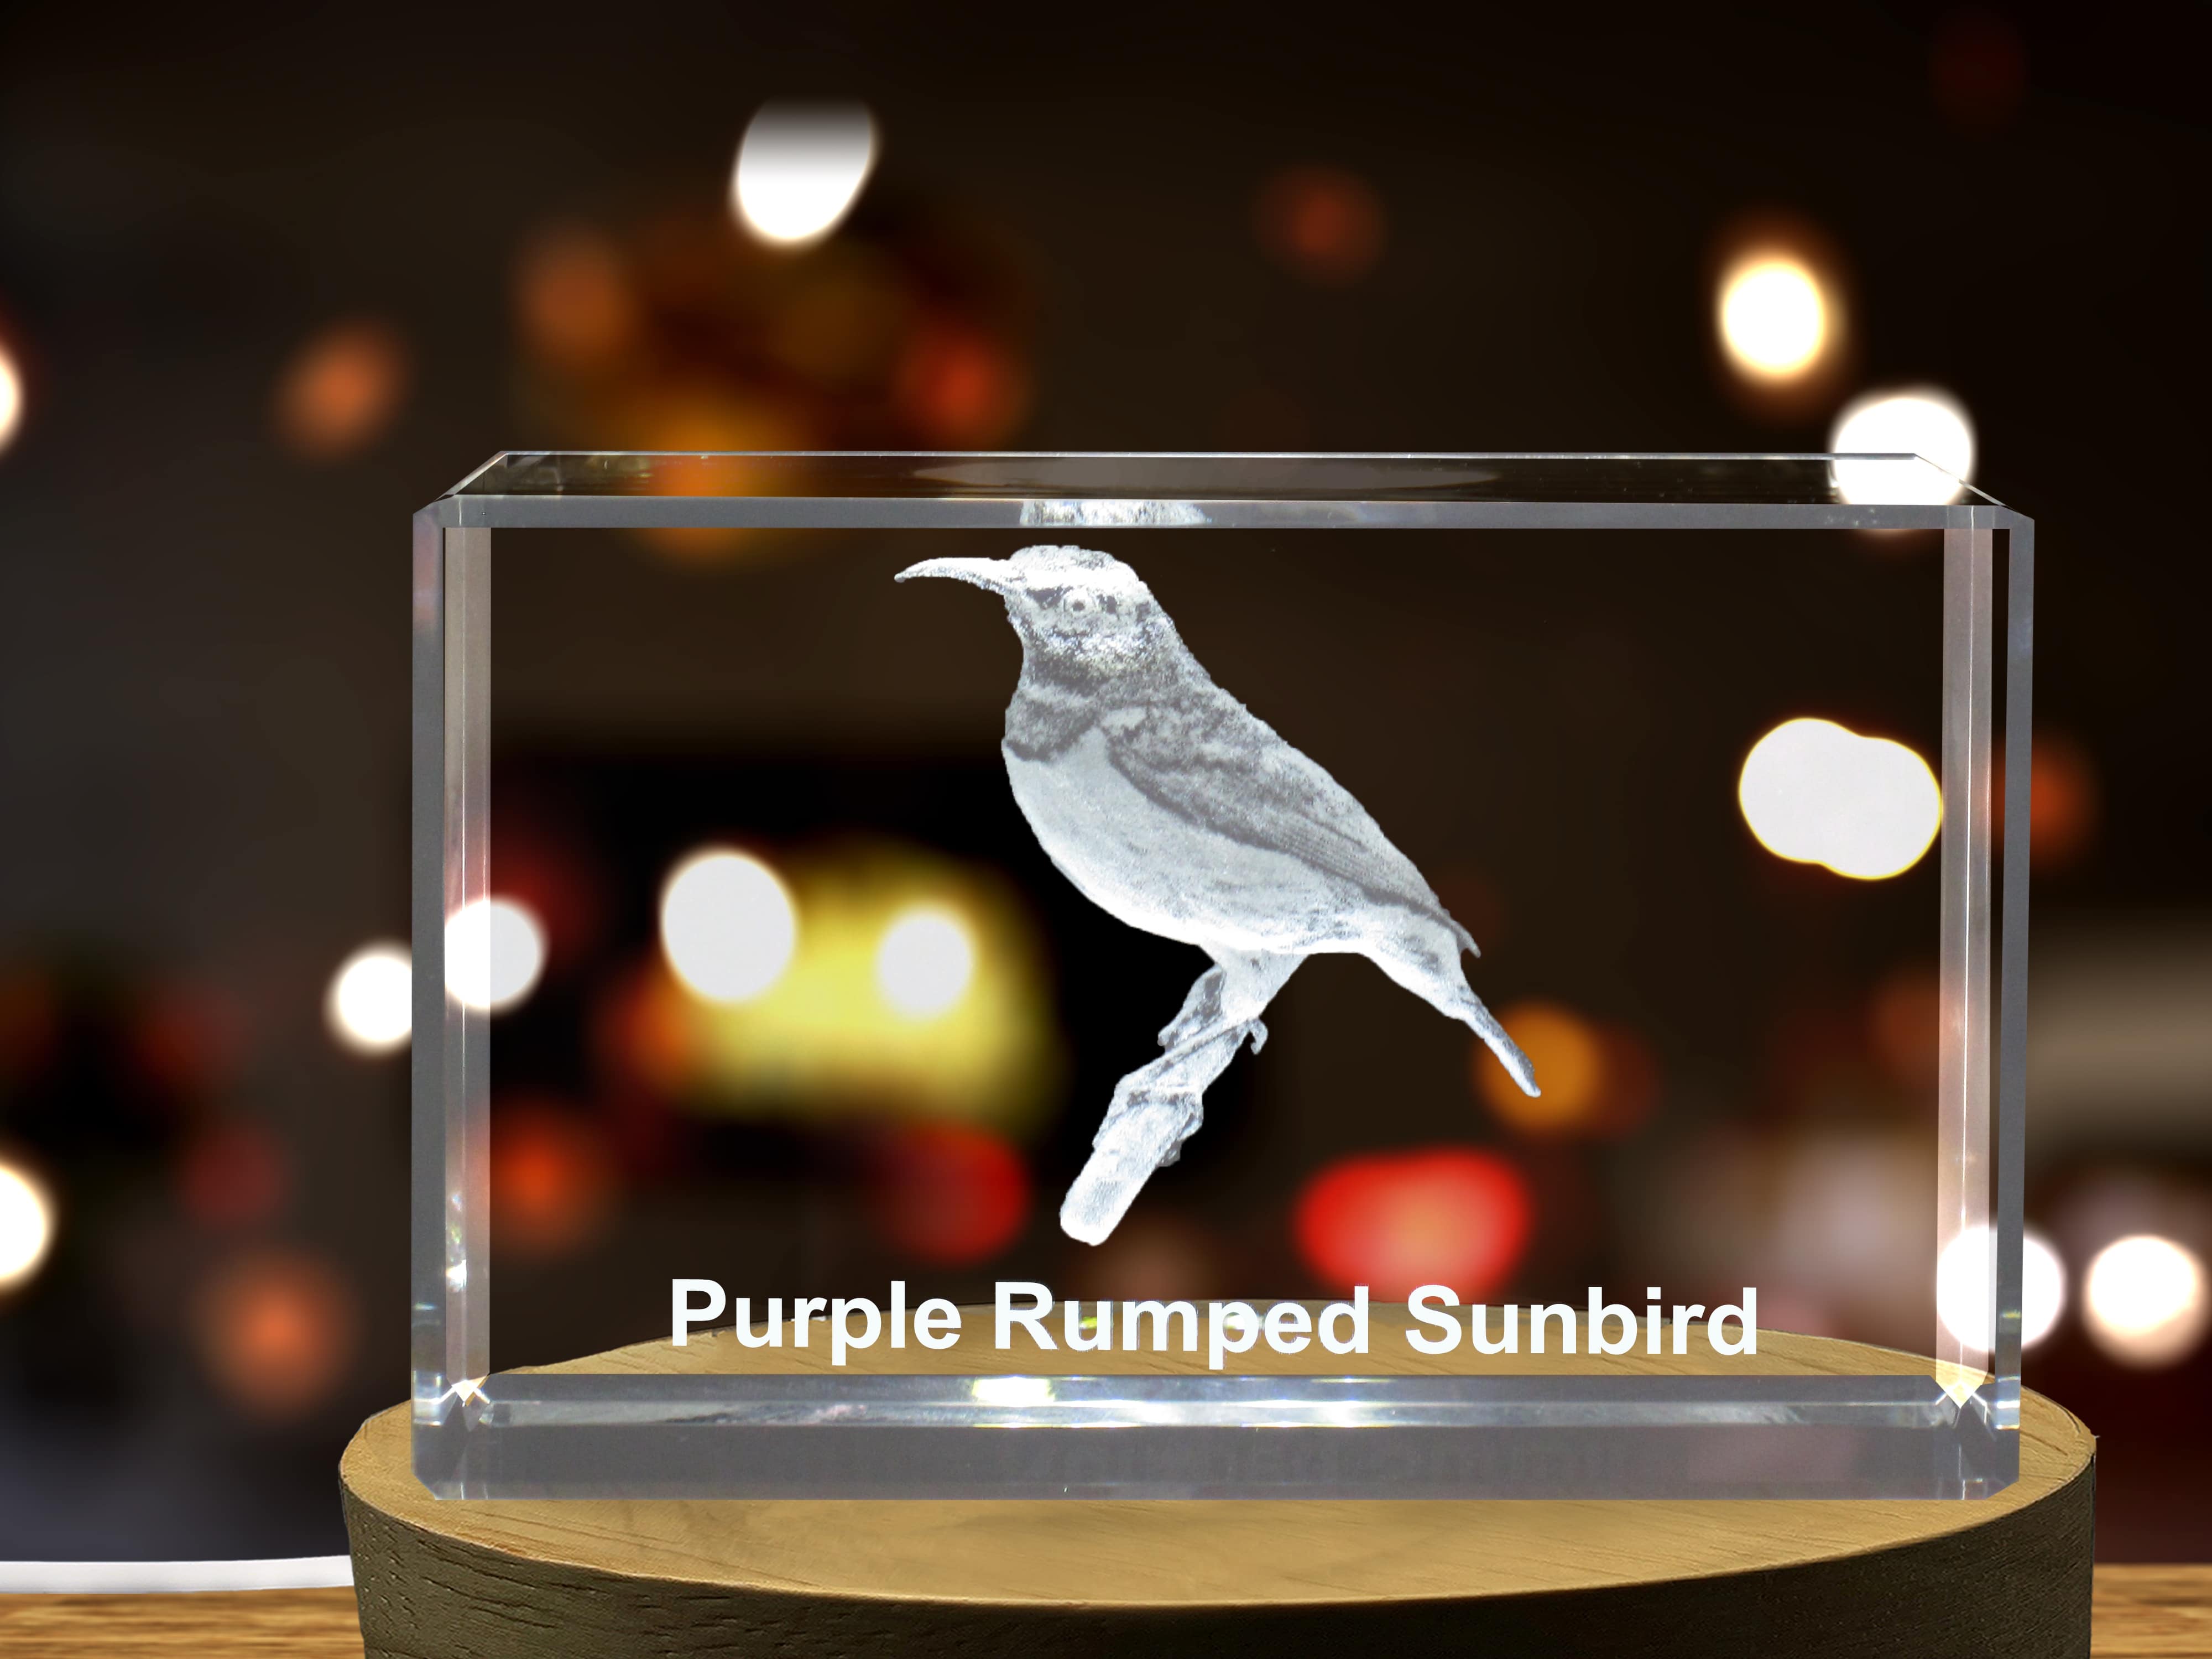 Purple-Rumped Sunbird 3D Engraved Crystal 3D Engraved Crystal Keepsake/Gift/Decor/Collectible/Souvenir A&B Crystal Collection